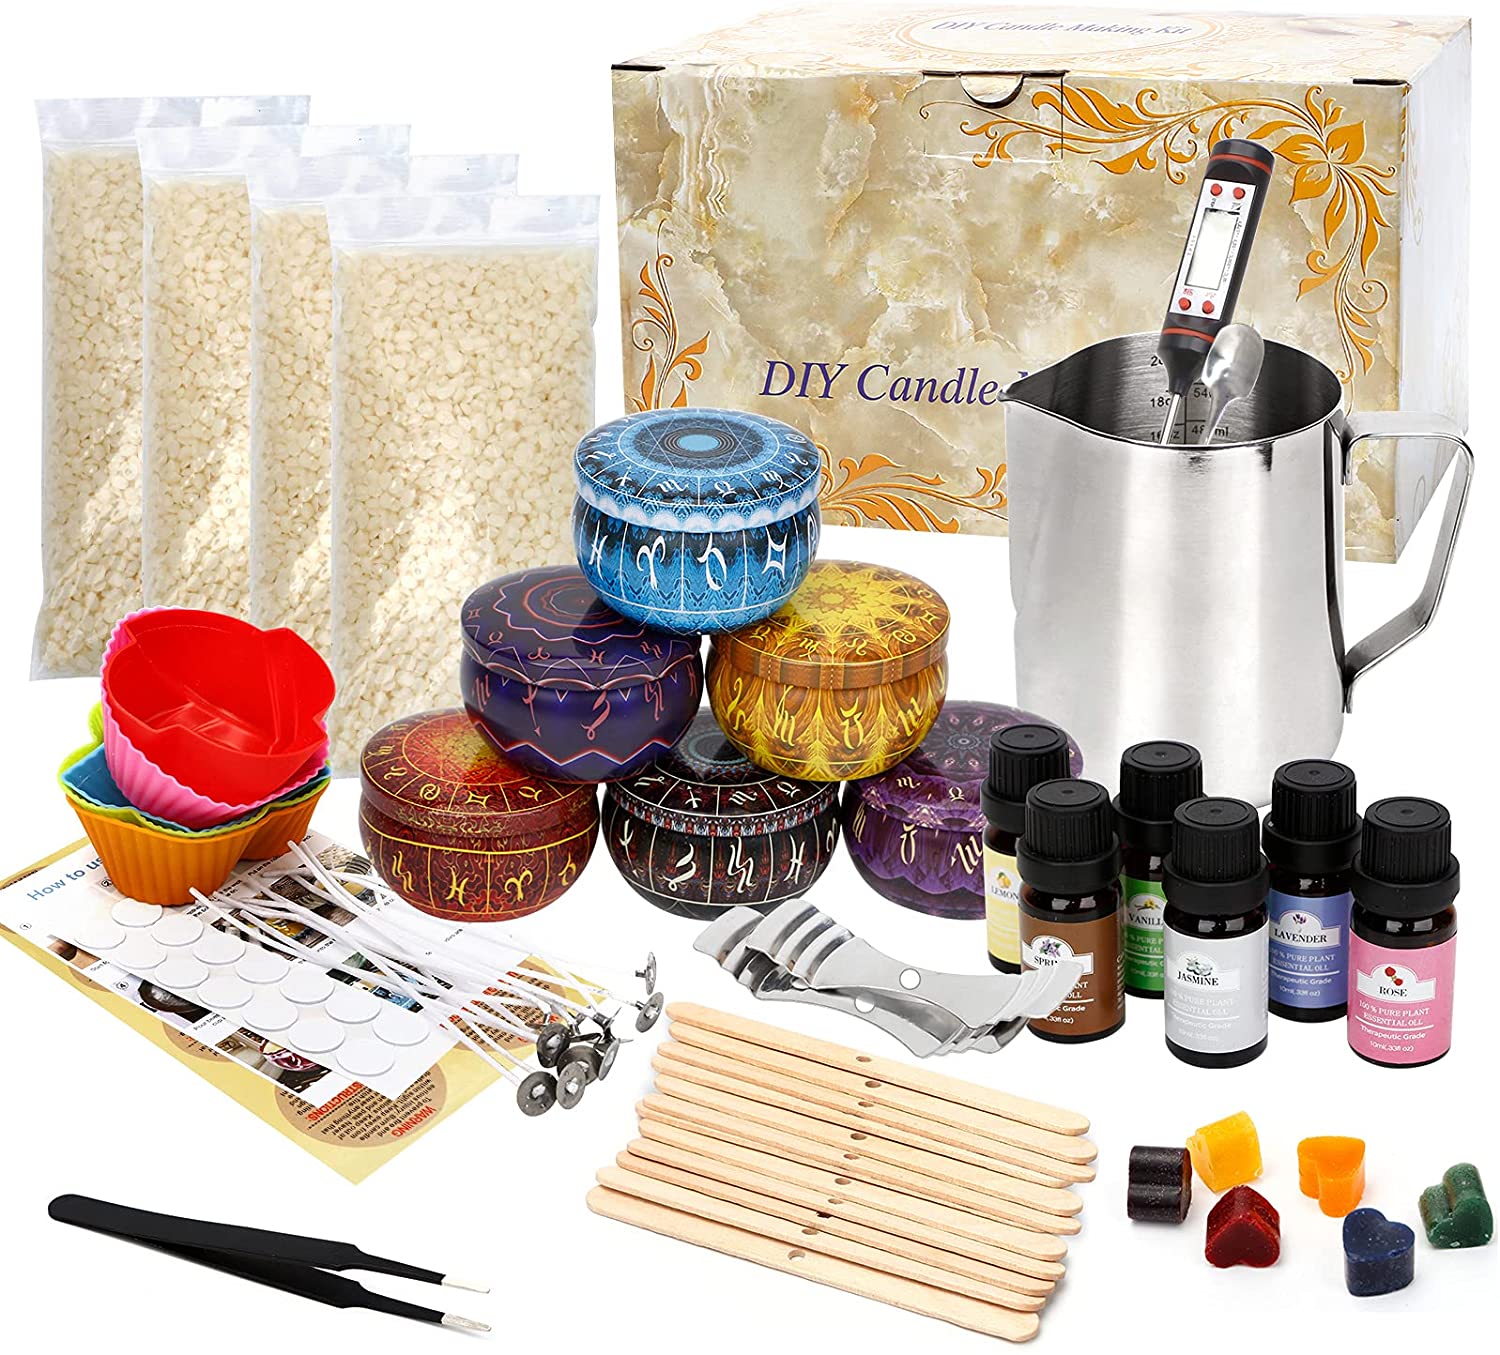 Wicks Rich Scents,Dyes,Melting Pot,Candle tins Complete Candle Making Kit,Candle Making Supplies,DIY Arts and Crafts Kits for Adults,Beginners,Kids Including Wax 